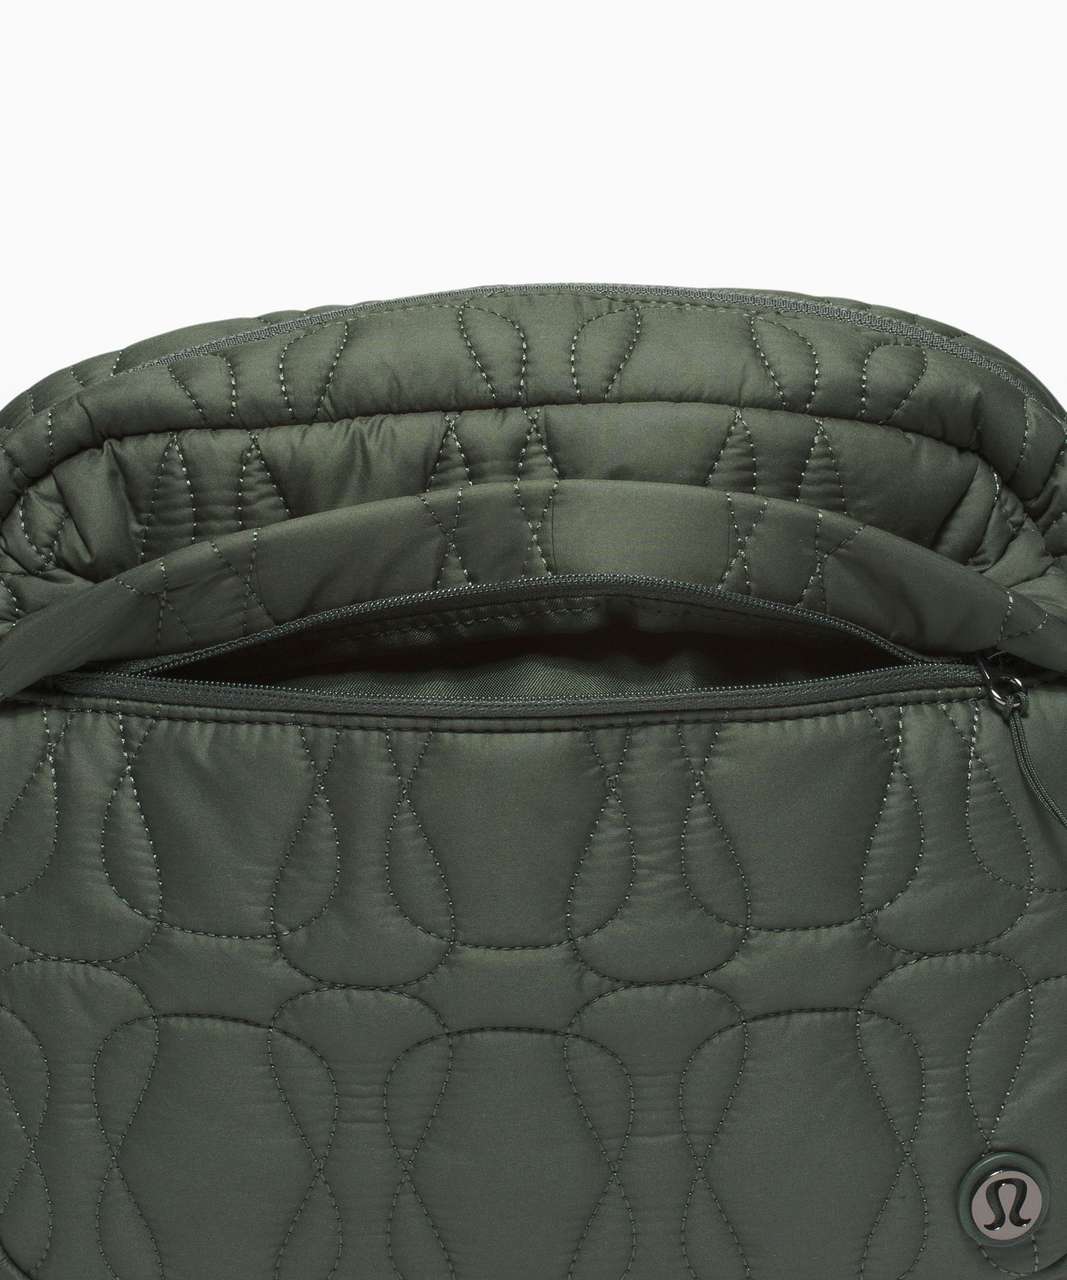 Lululemon Quilted Embrace Crossbody Bag - Smoked Spruce